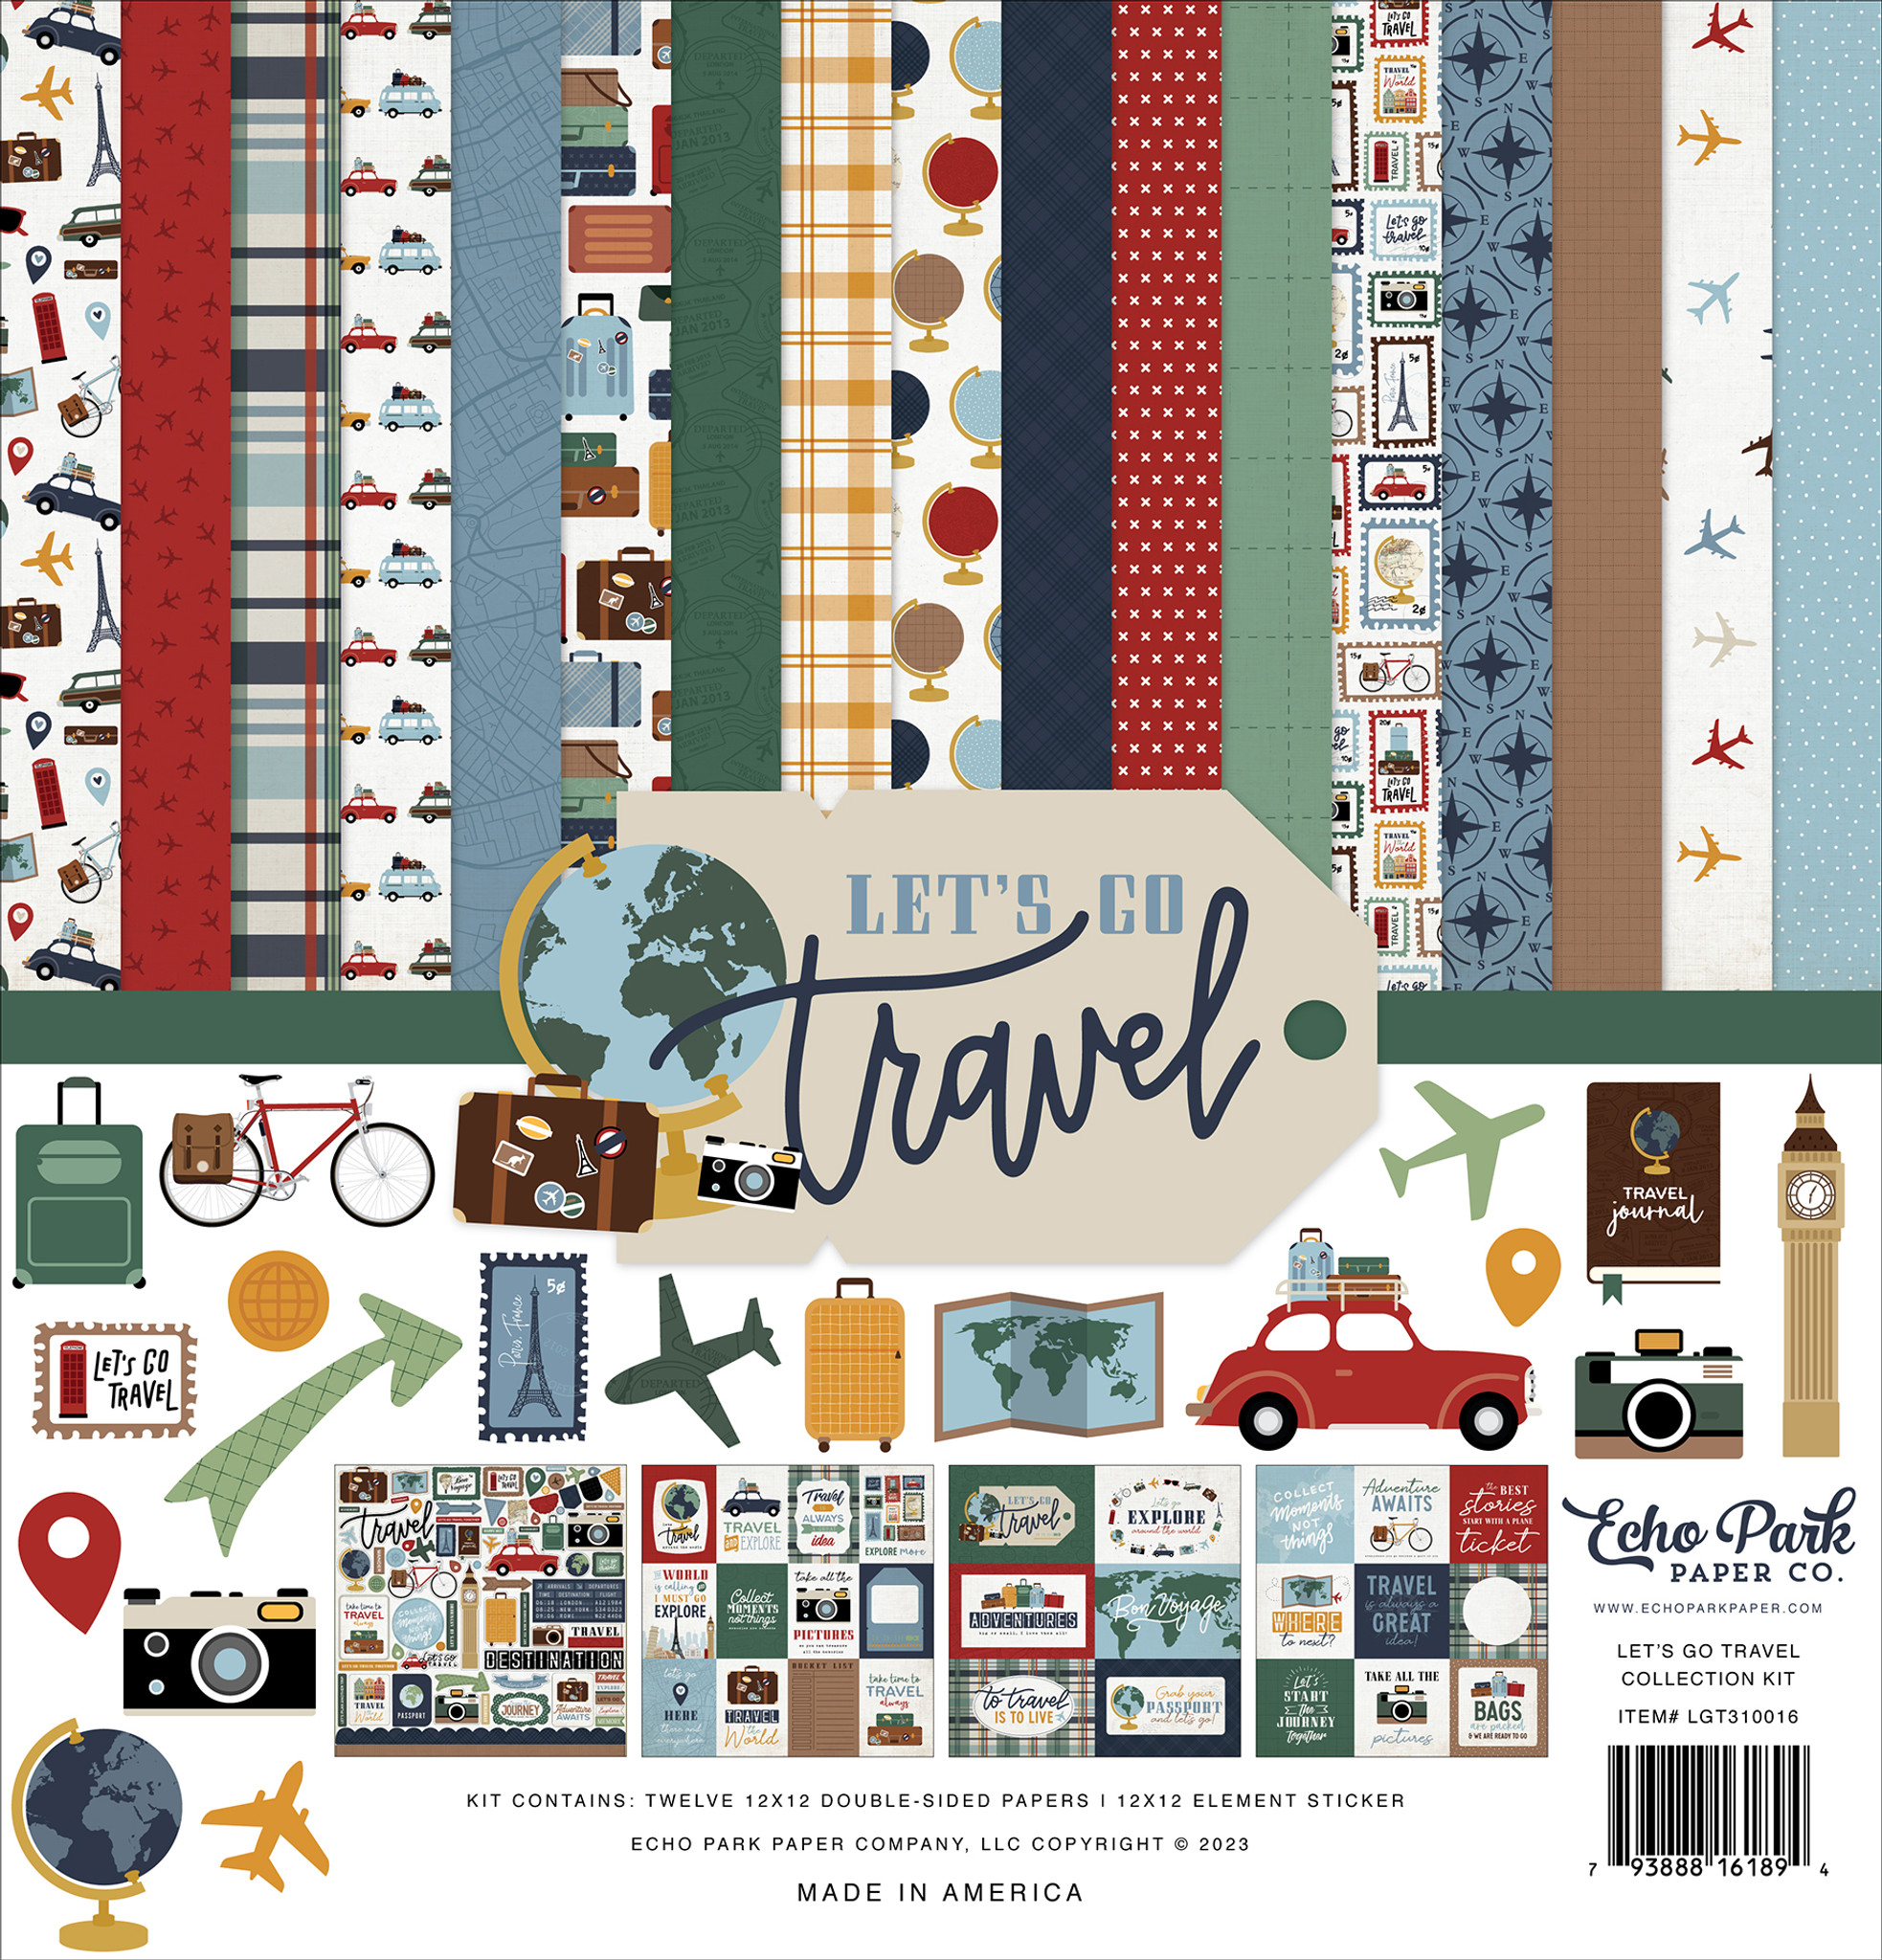 Here There and Everywhere Collection Kit - Echo Park Paper Co.